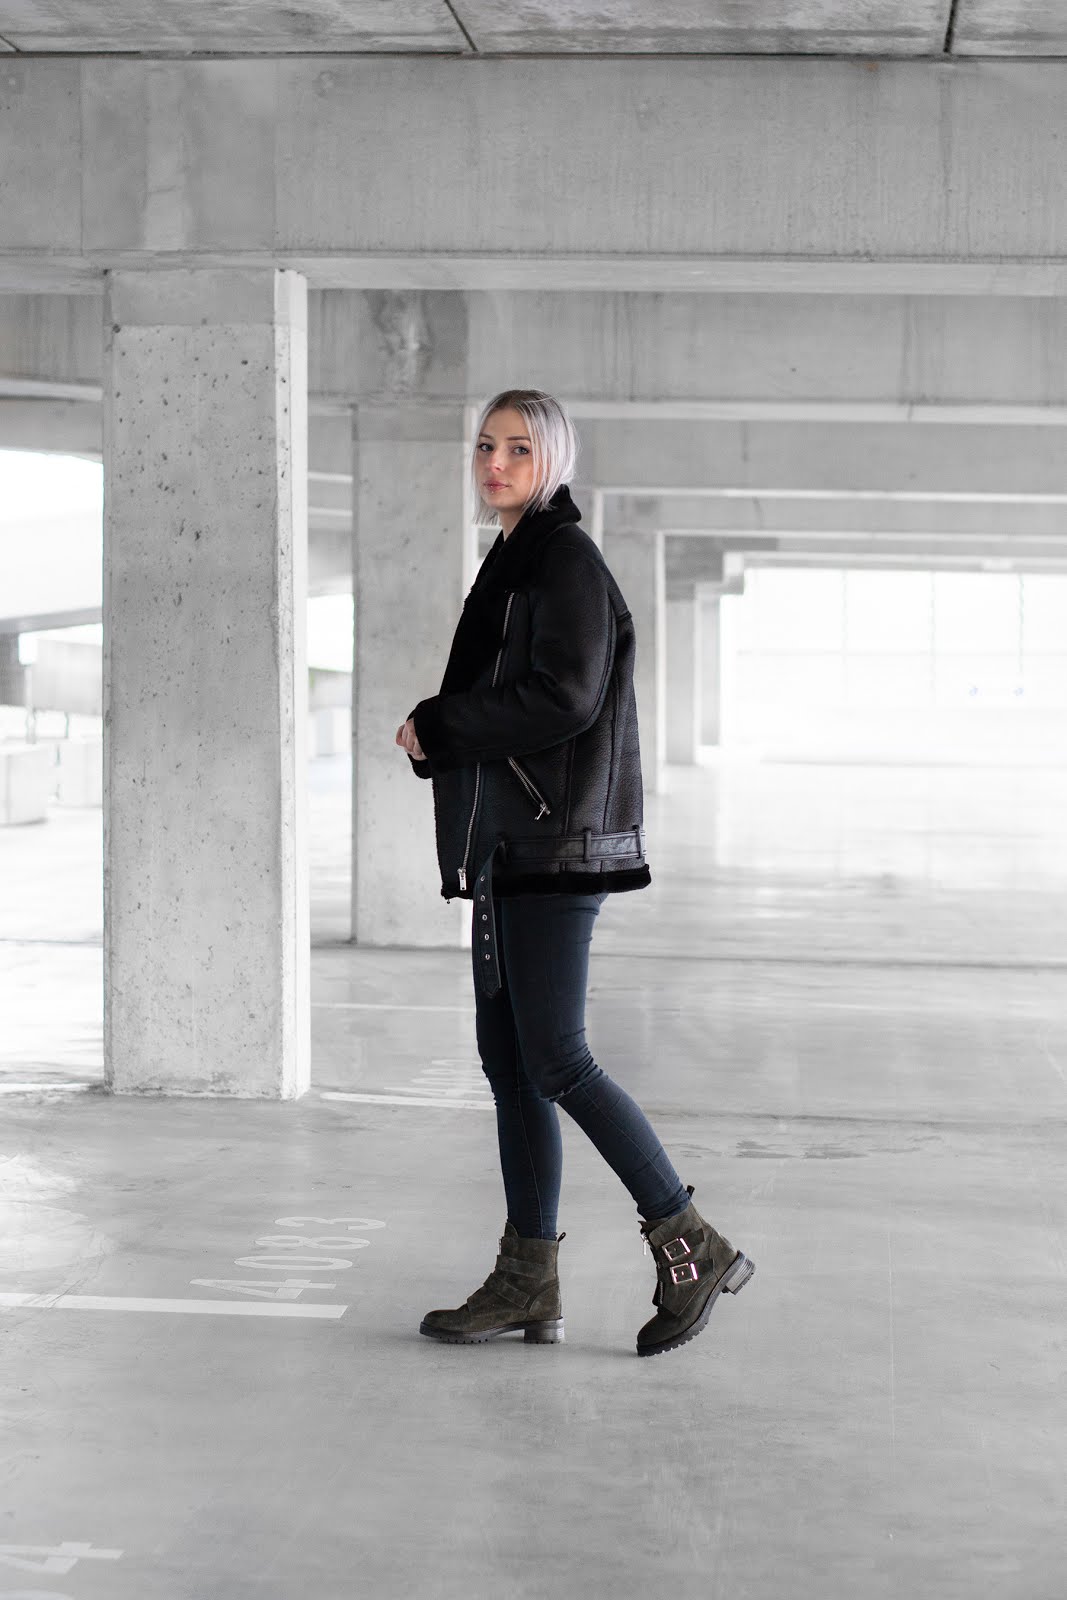 Sacha shoes, na-kd, biker boots, shearling coat, all black, minimal outfit, street style, 2019, trends, win free shoes